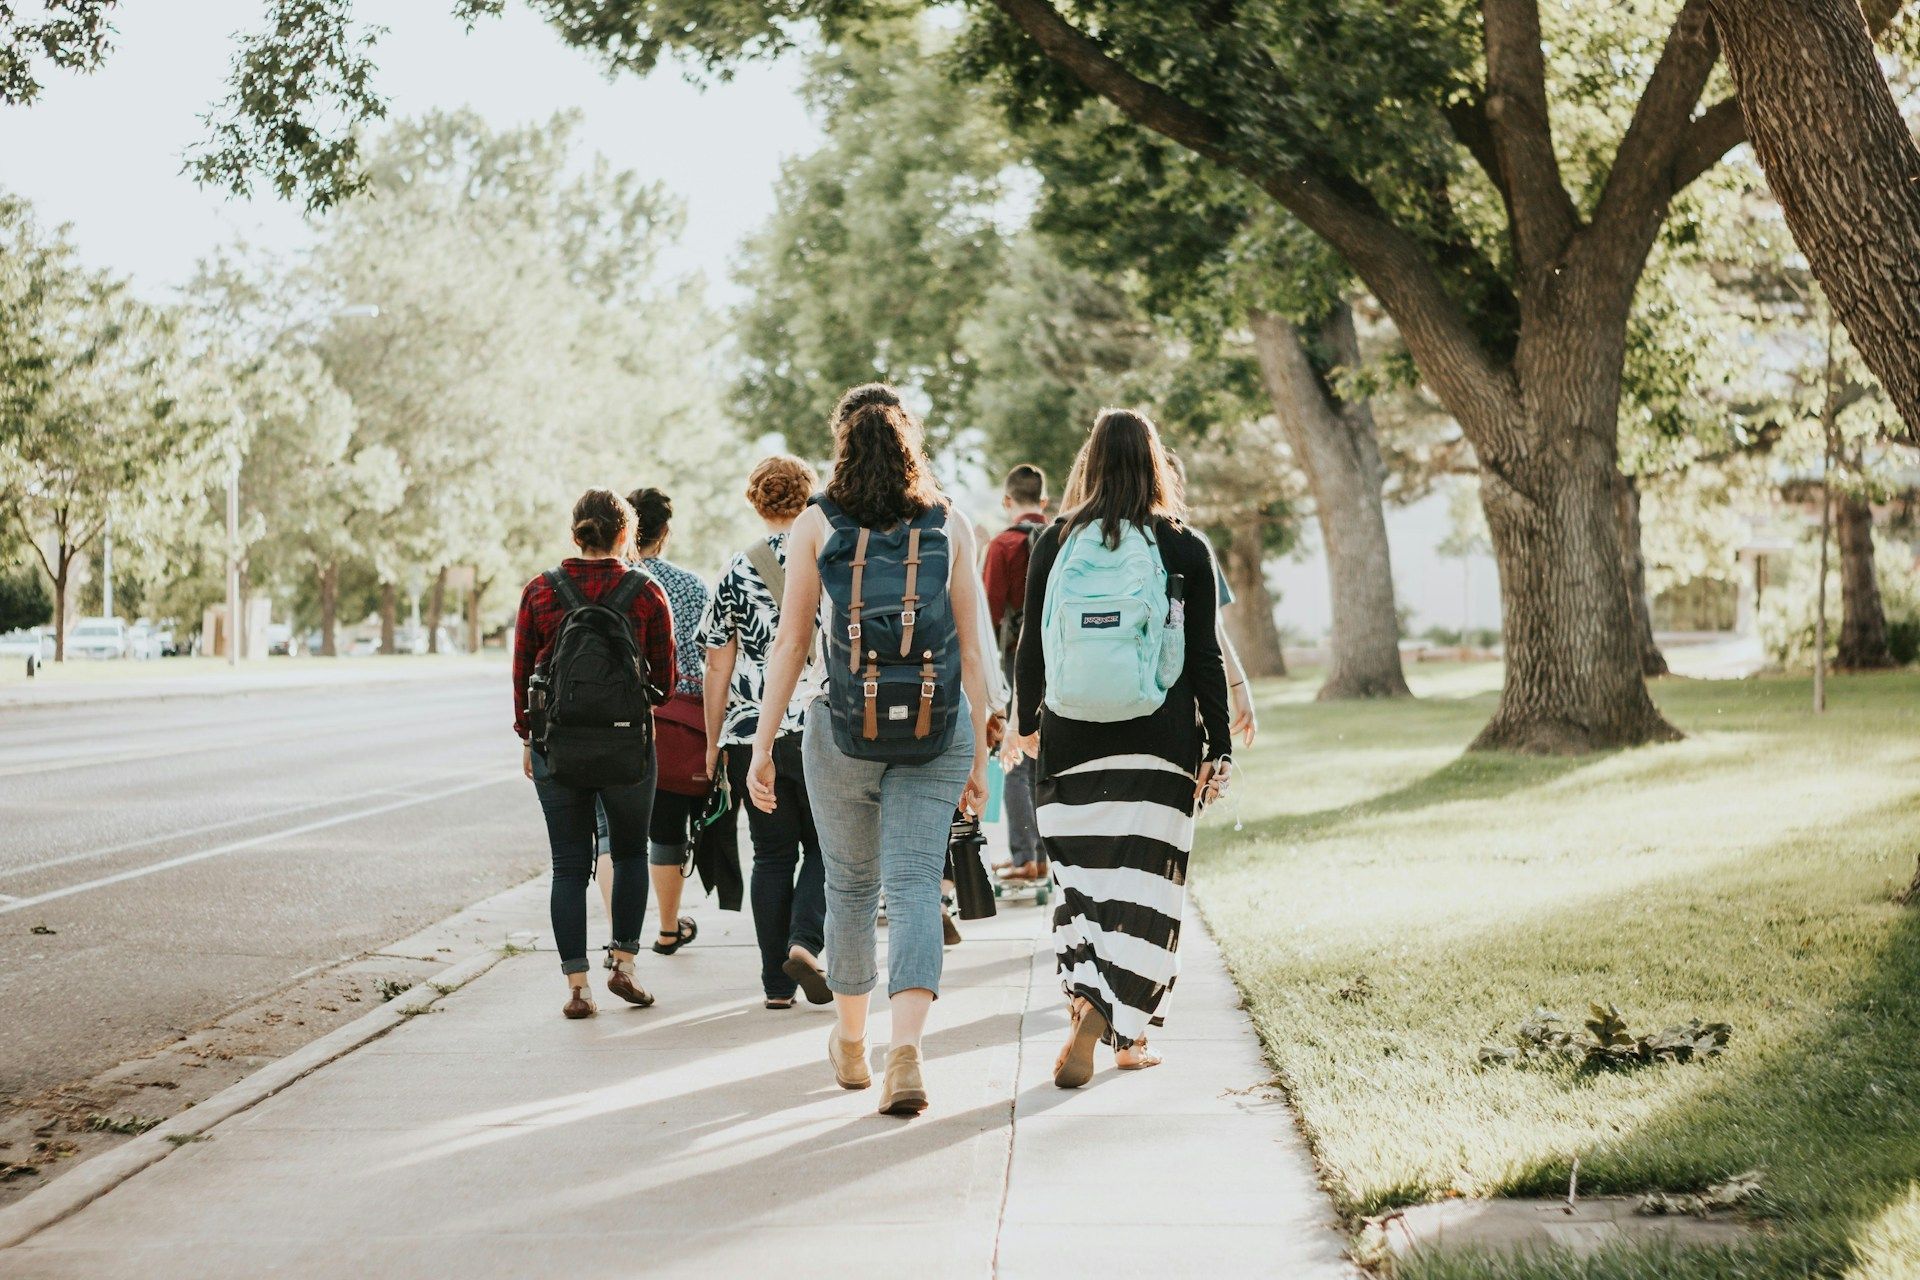 A group of people with backpacks are walking down a sidewalk.